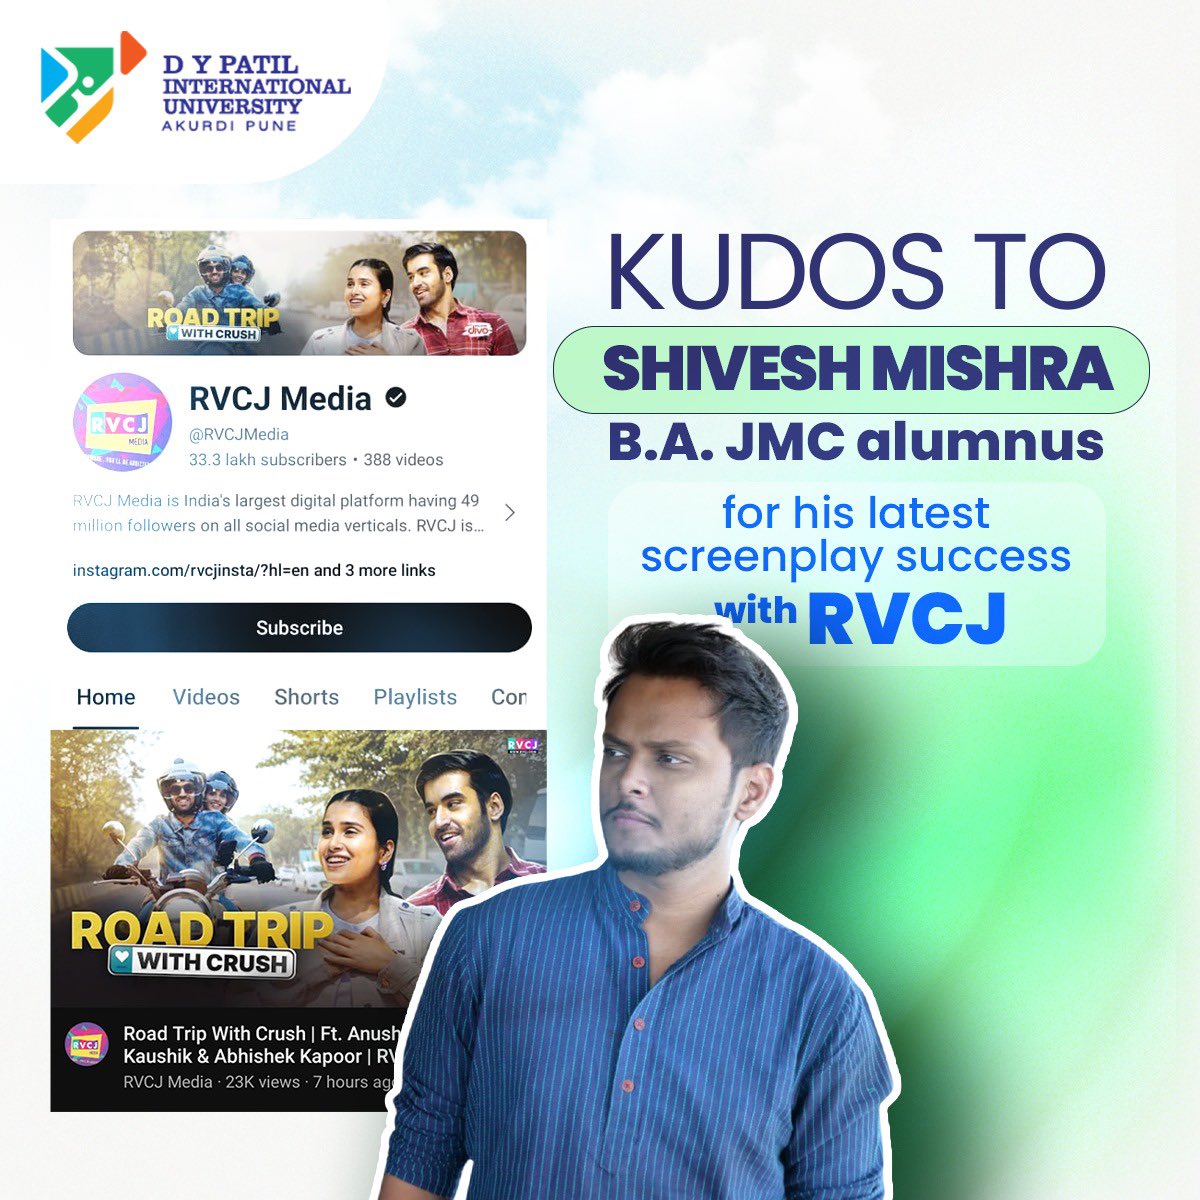 Proud of Shivesh Mishra, a standout talent from our B.A. JMC 2019-22 batch! His recent accomplishments as a screenplay writer for RVCJ and various web series are truly remarkable.

#alumniachievement #dypiualimni #proudachievememt #dypiu